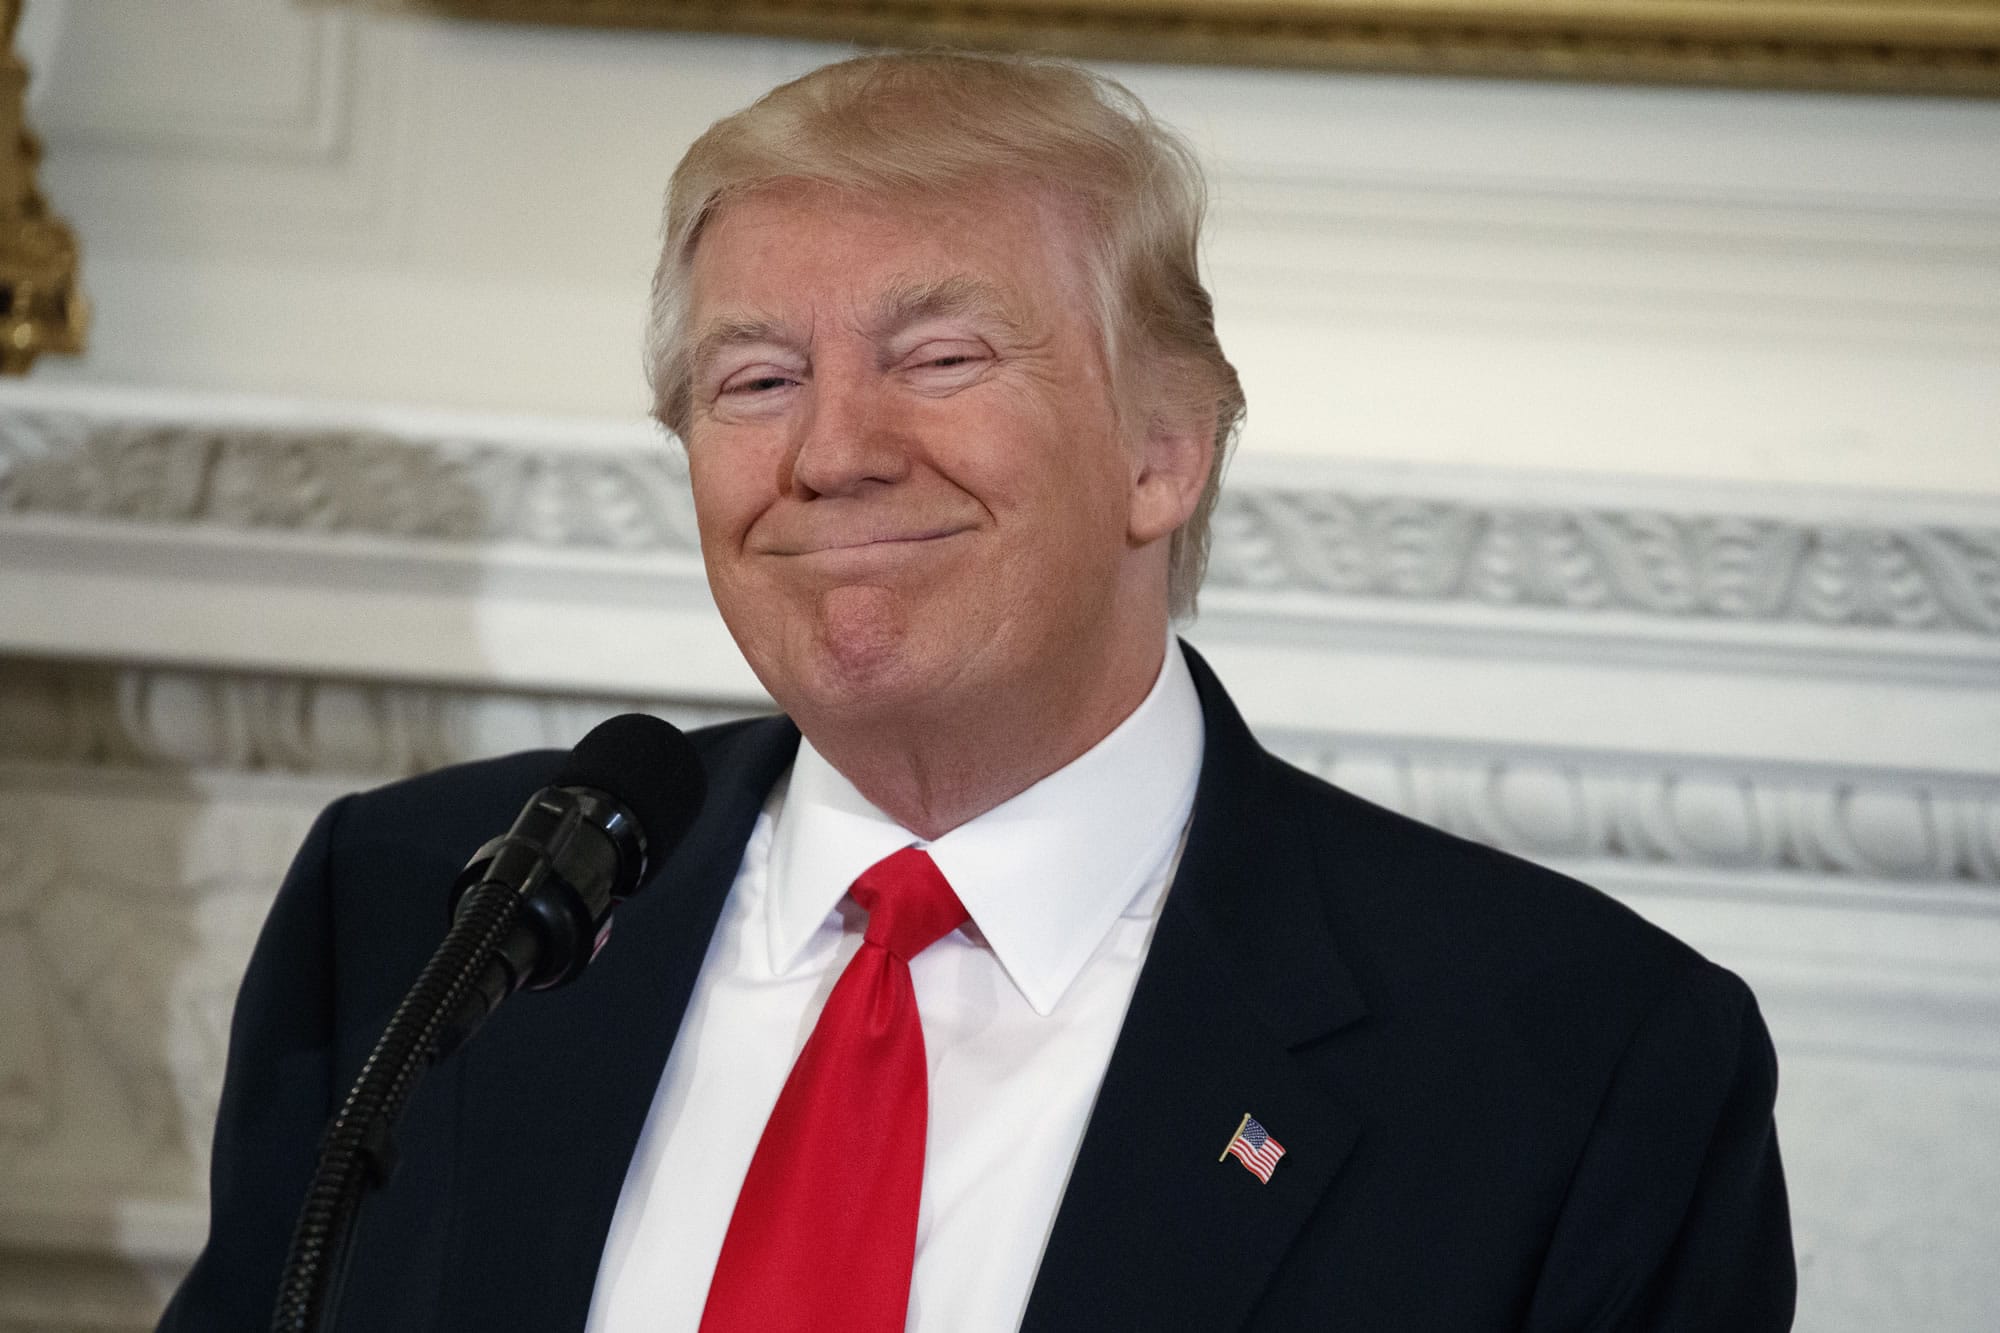 President Donald Trump smiles while speaking to a meeting of the National Governors Association, Monday, Feb. 27, 2017, at the White House in Washington.